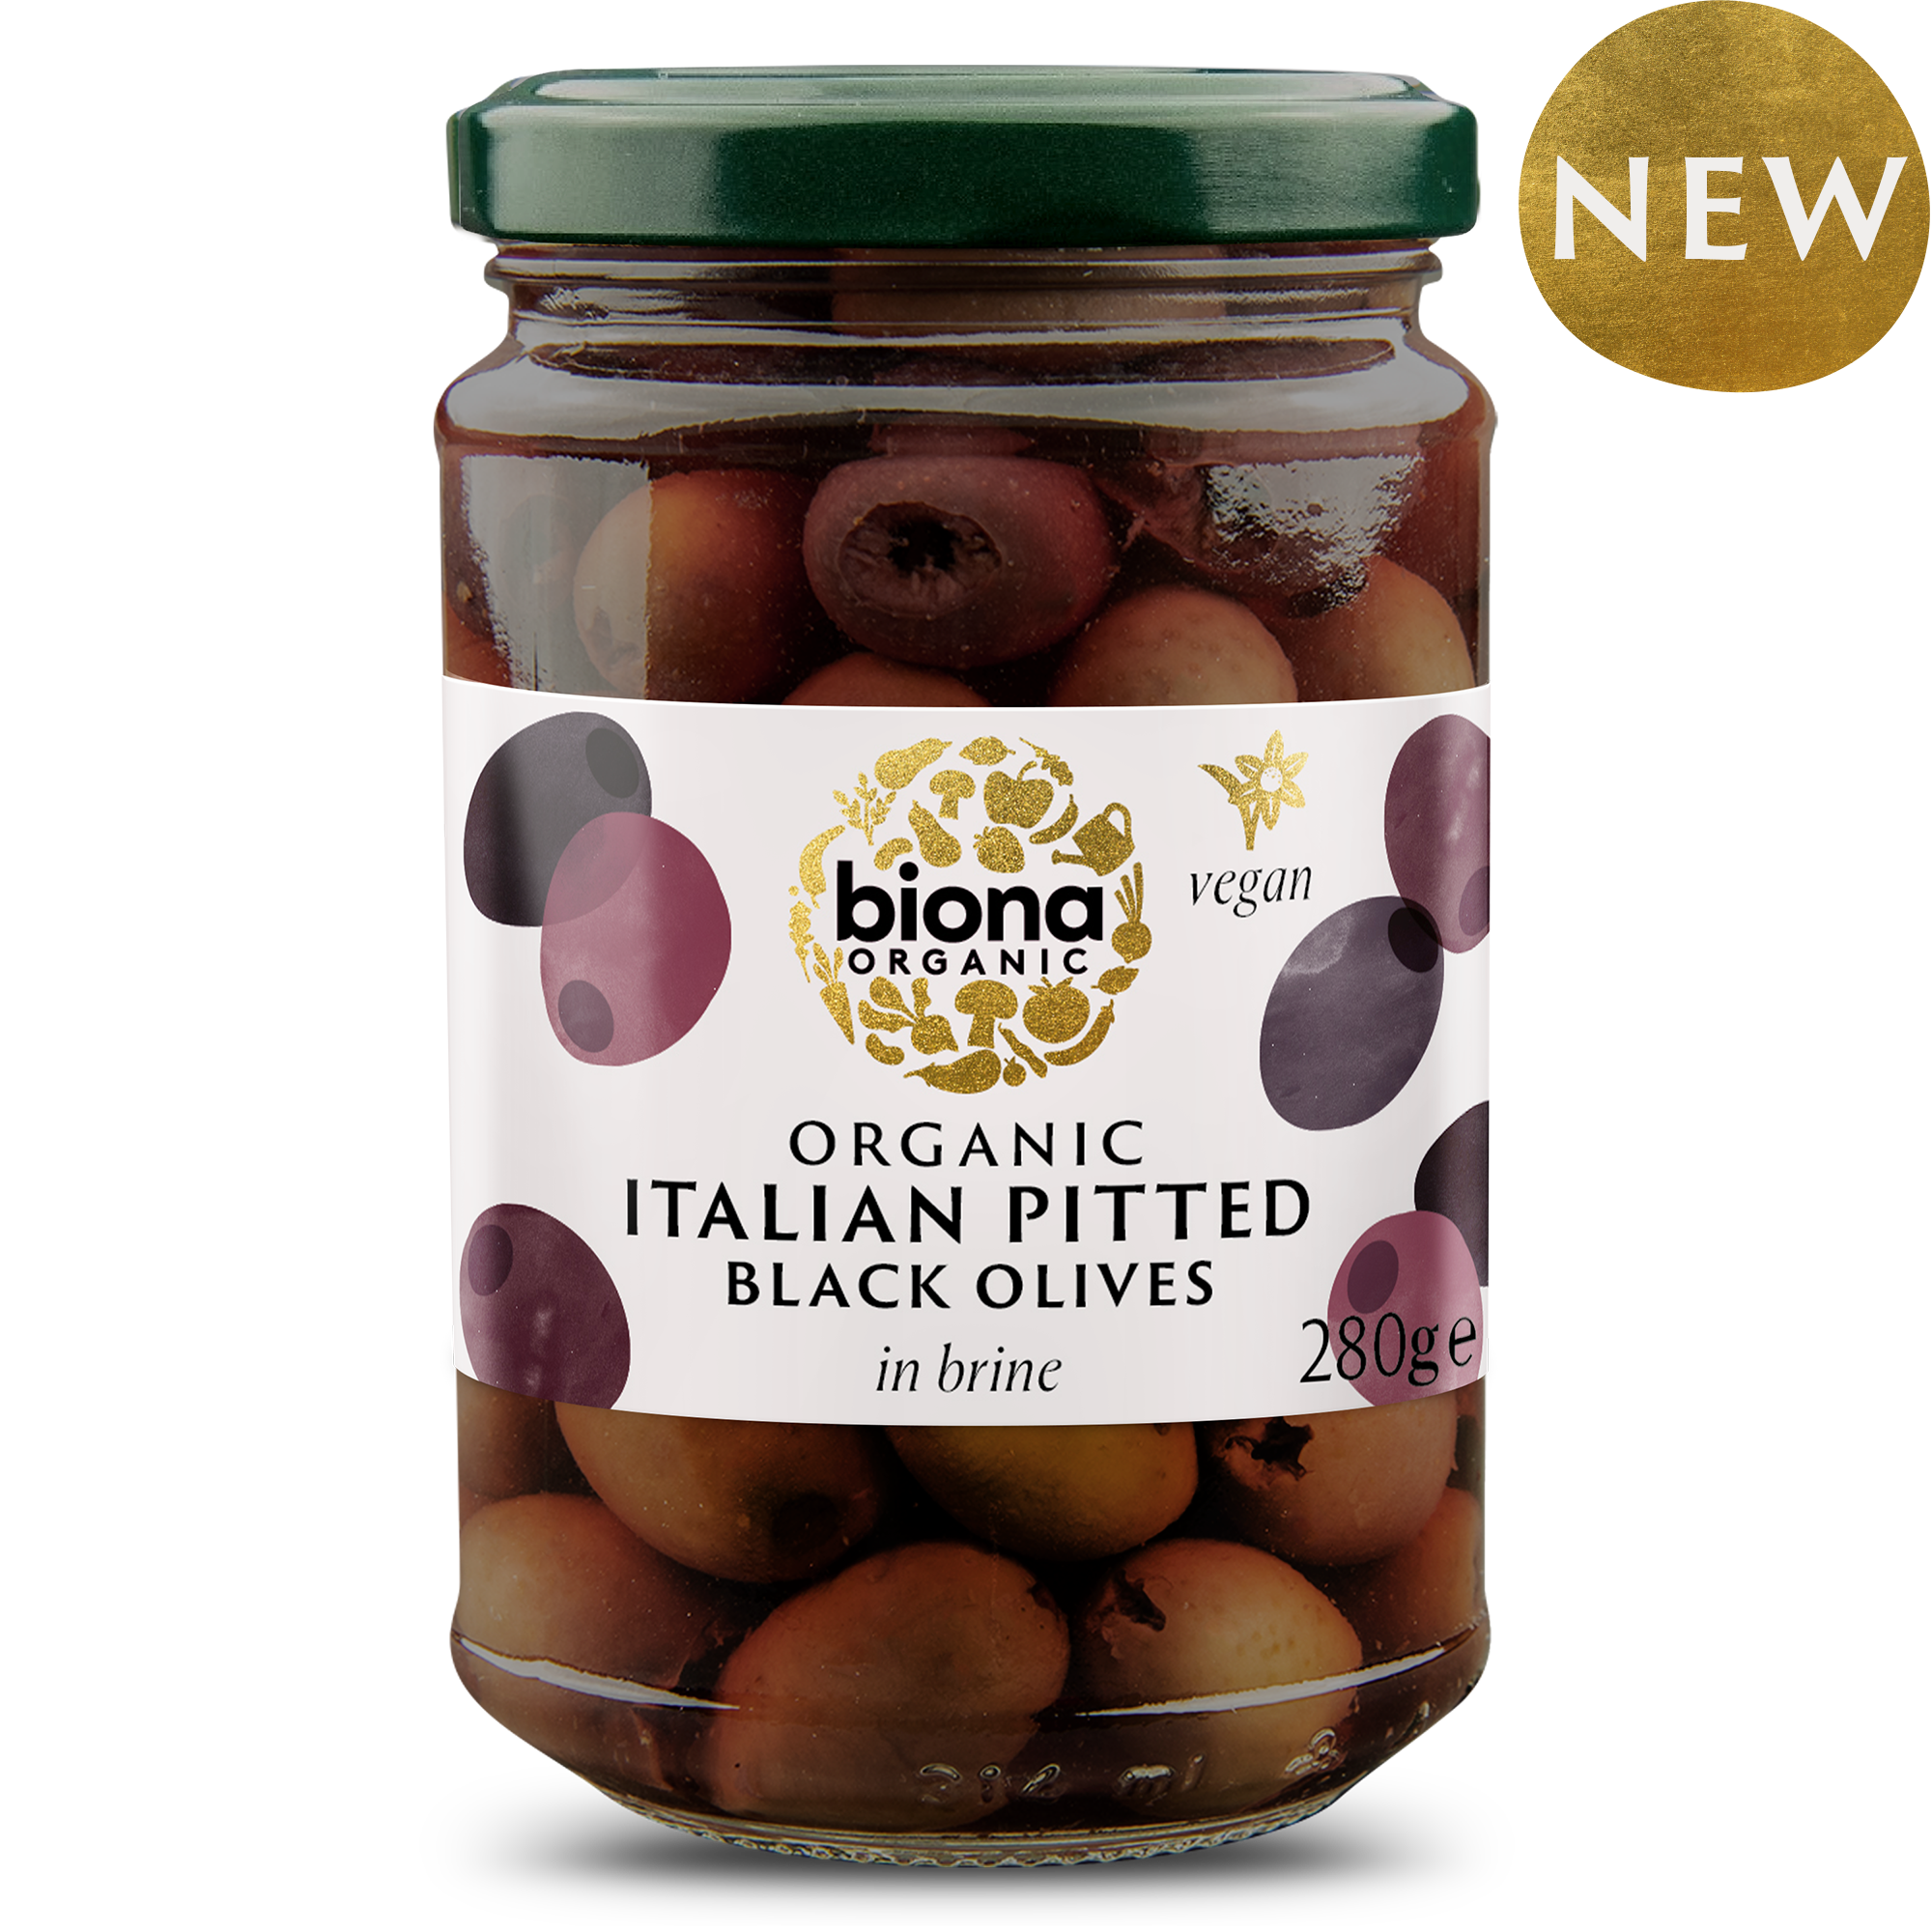 PITTED BLACK OLIVES IN BRINE